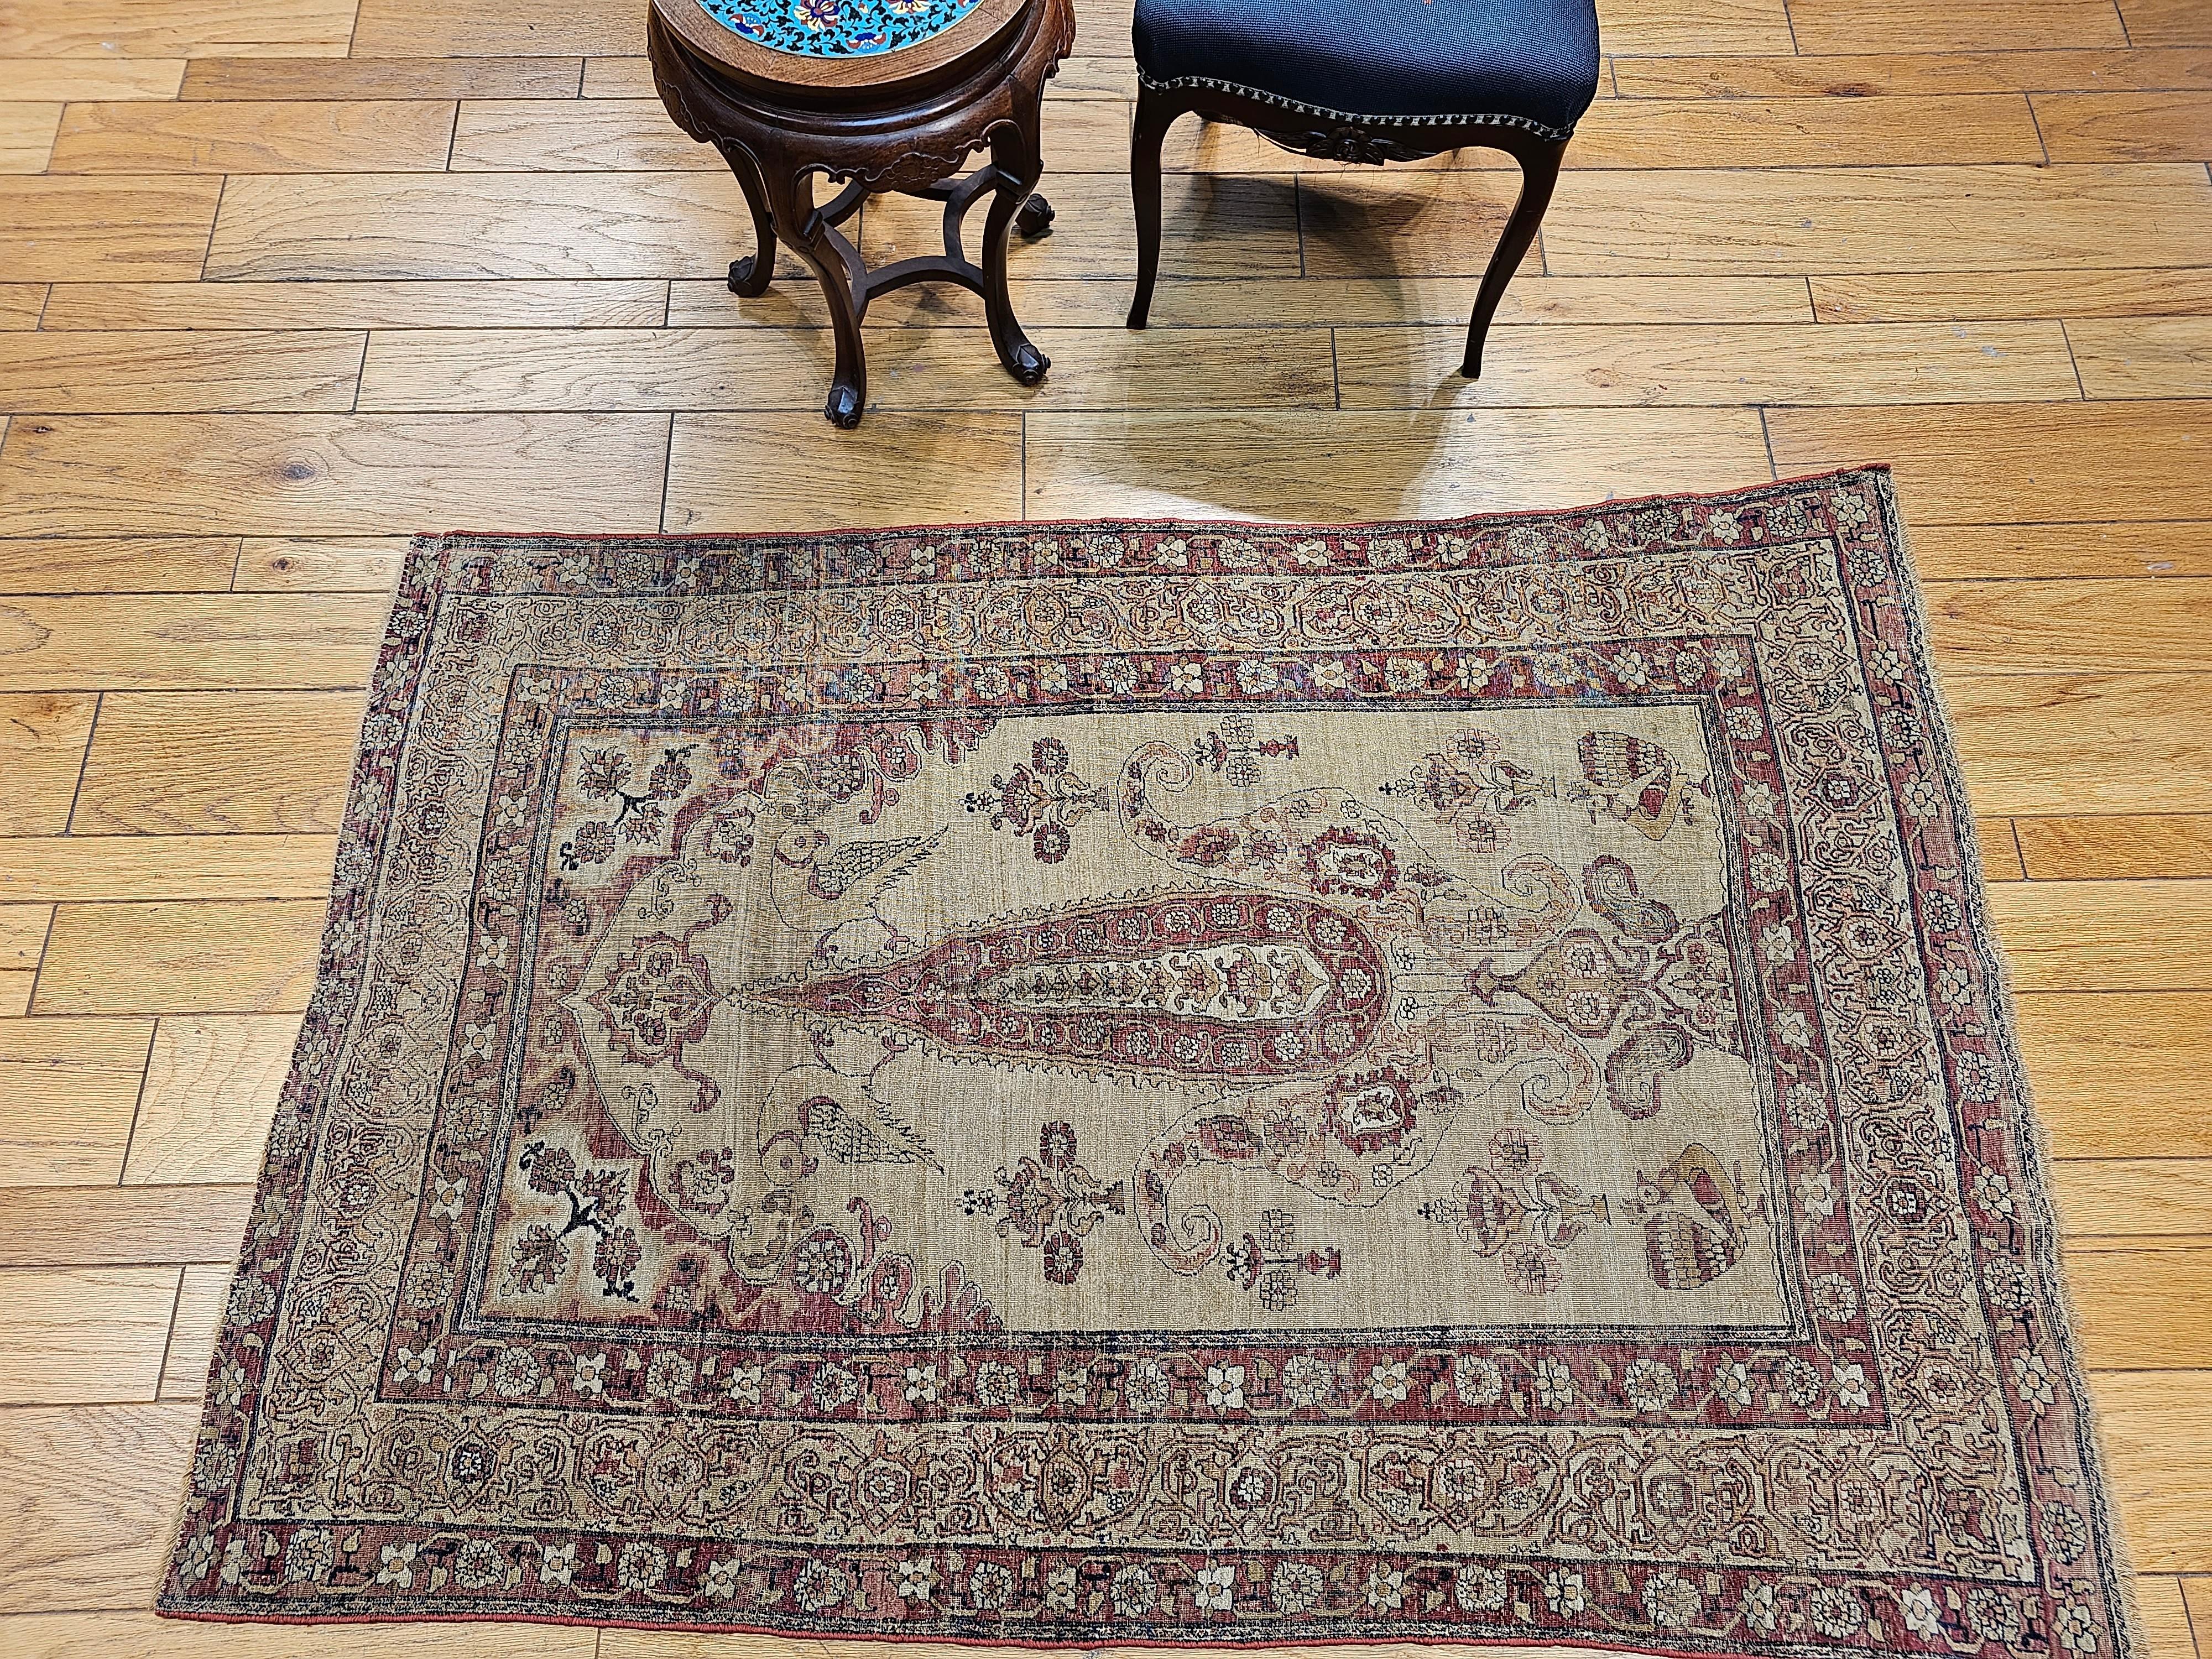 19th Century Persian Kerman Lavar Pictorial “Tree of Life” Rug in Camel, Red For Sale 10